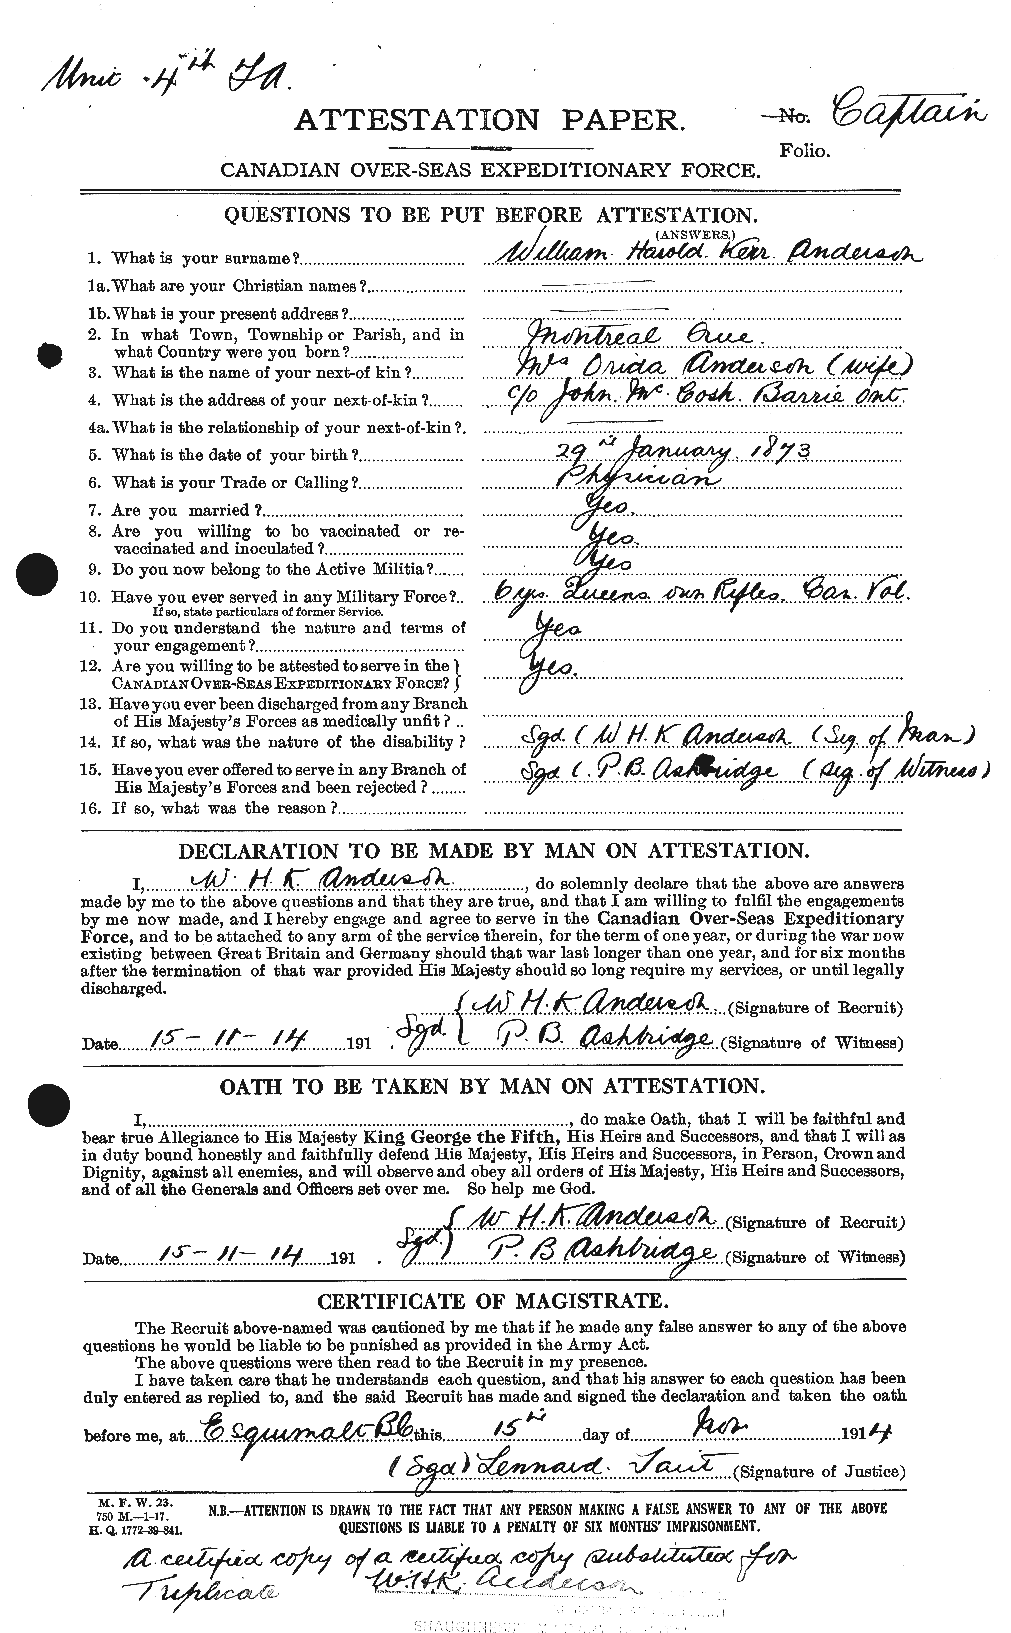 Personnel Records of the First World War - CEF 210718a